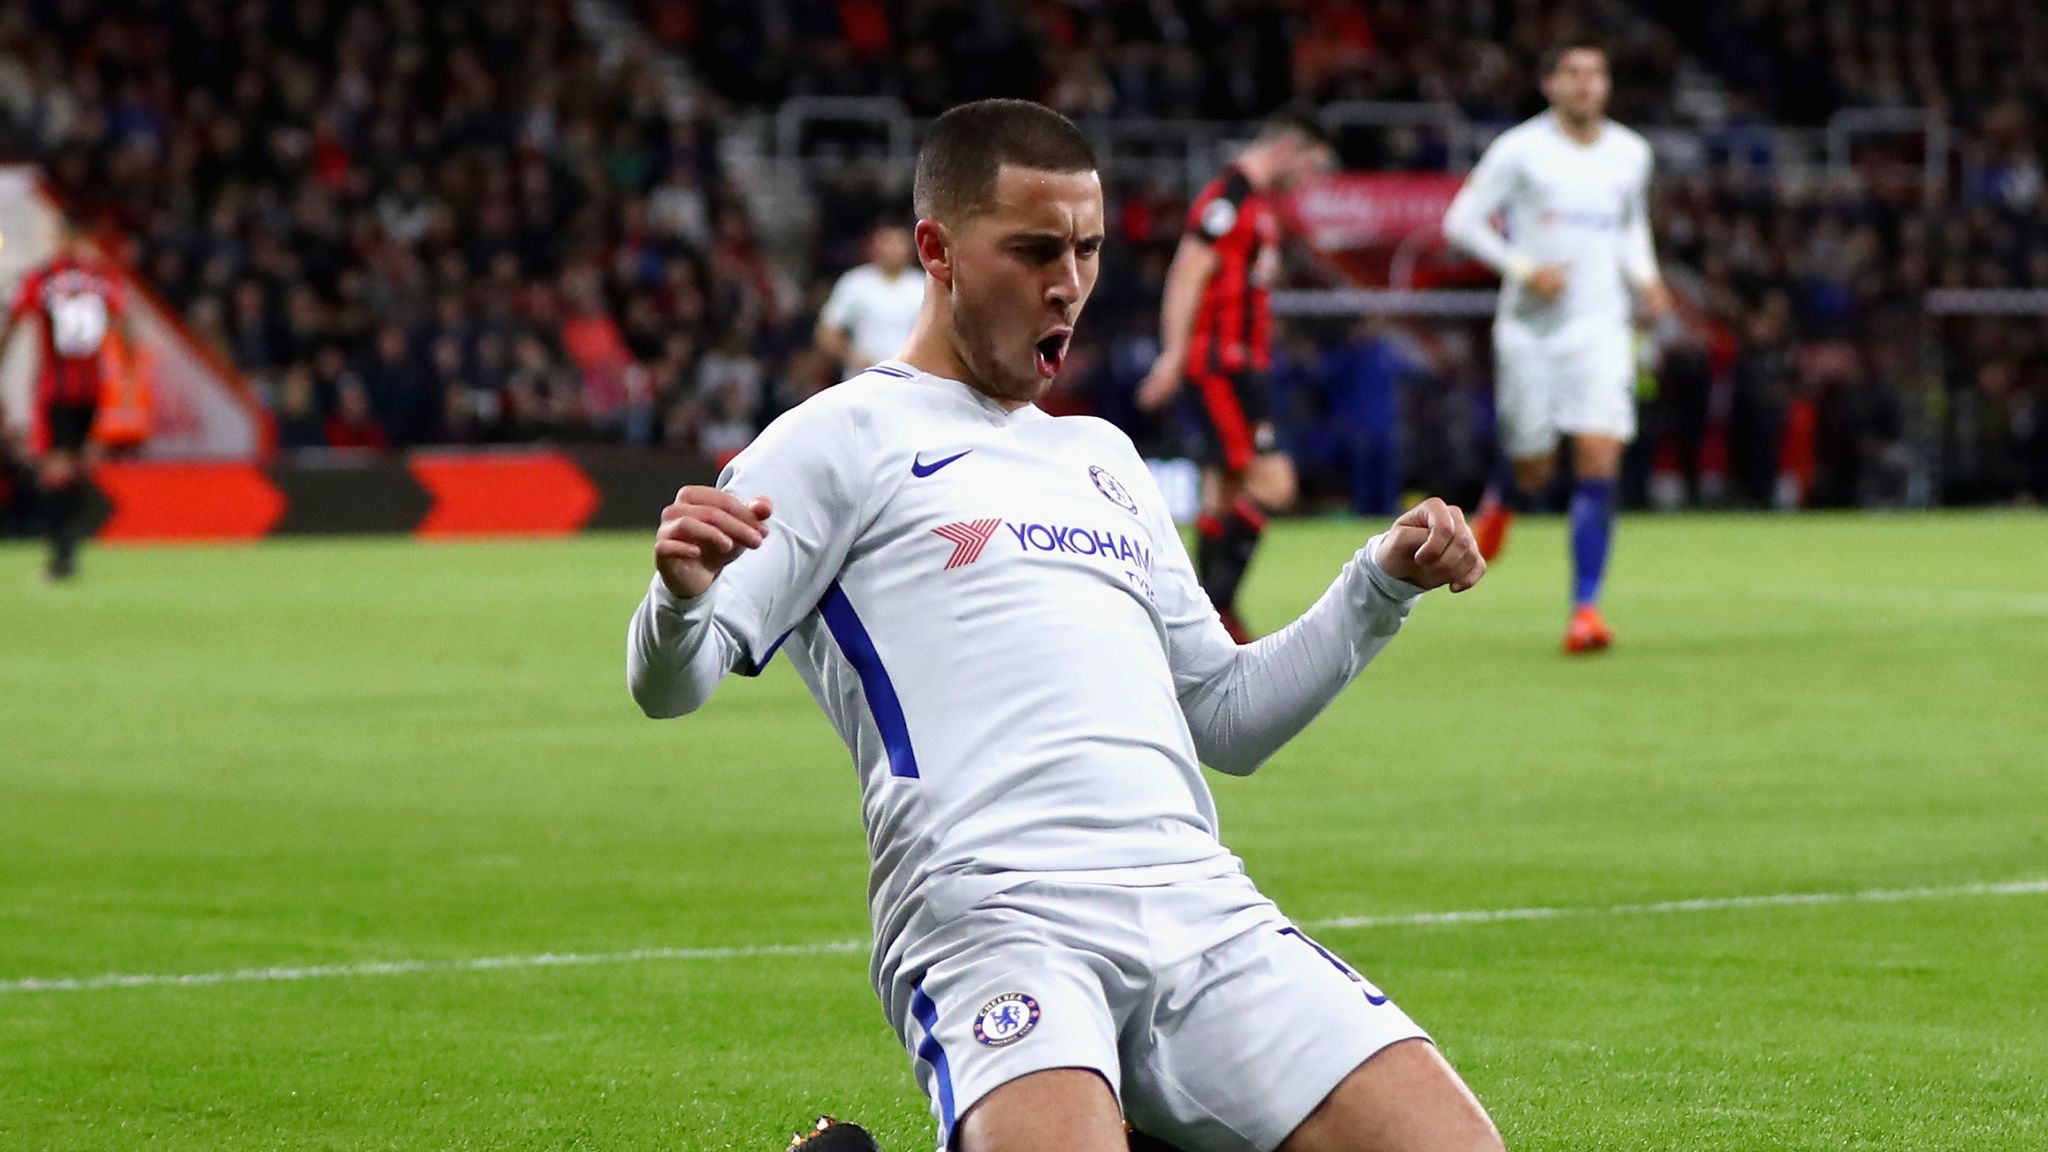 Bournemouth 0-1 Chelsea Eden Hazard seals win for visitors Football News Sky Sports